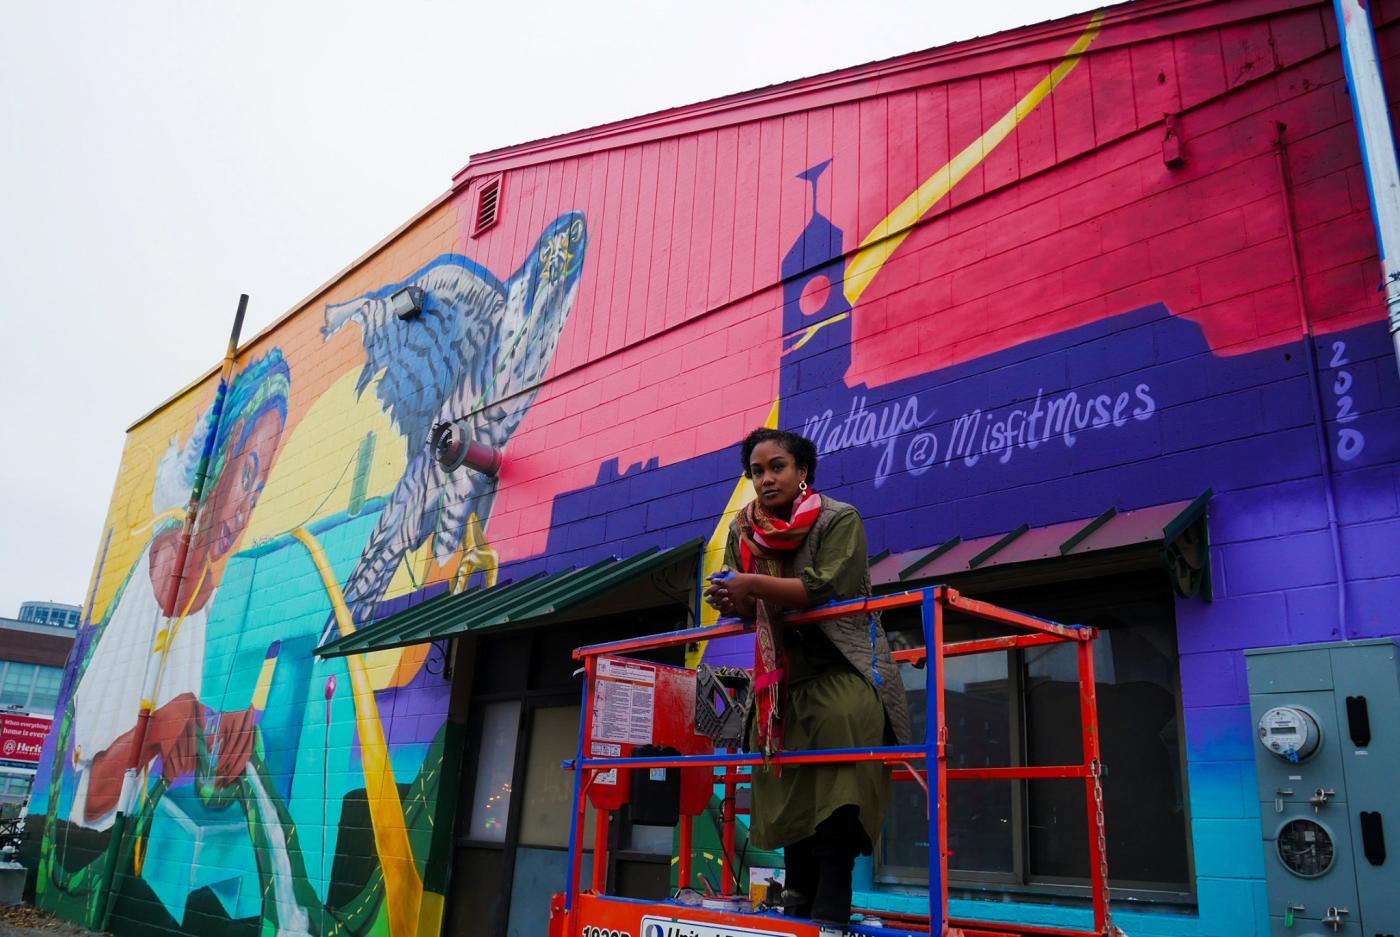 A Black woman poses with a mural behind her, a mural of a Black woman with a bird in very rich, bright colors.